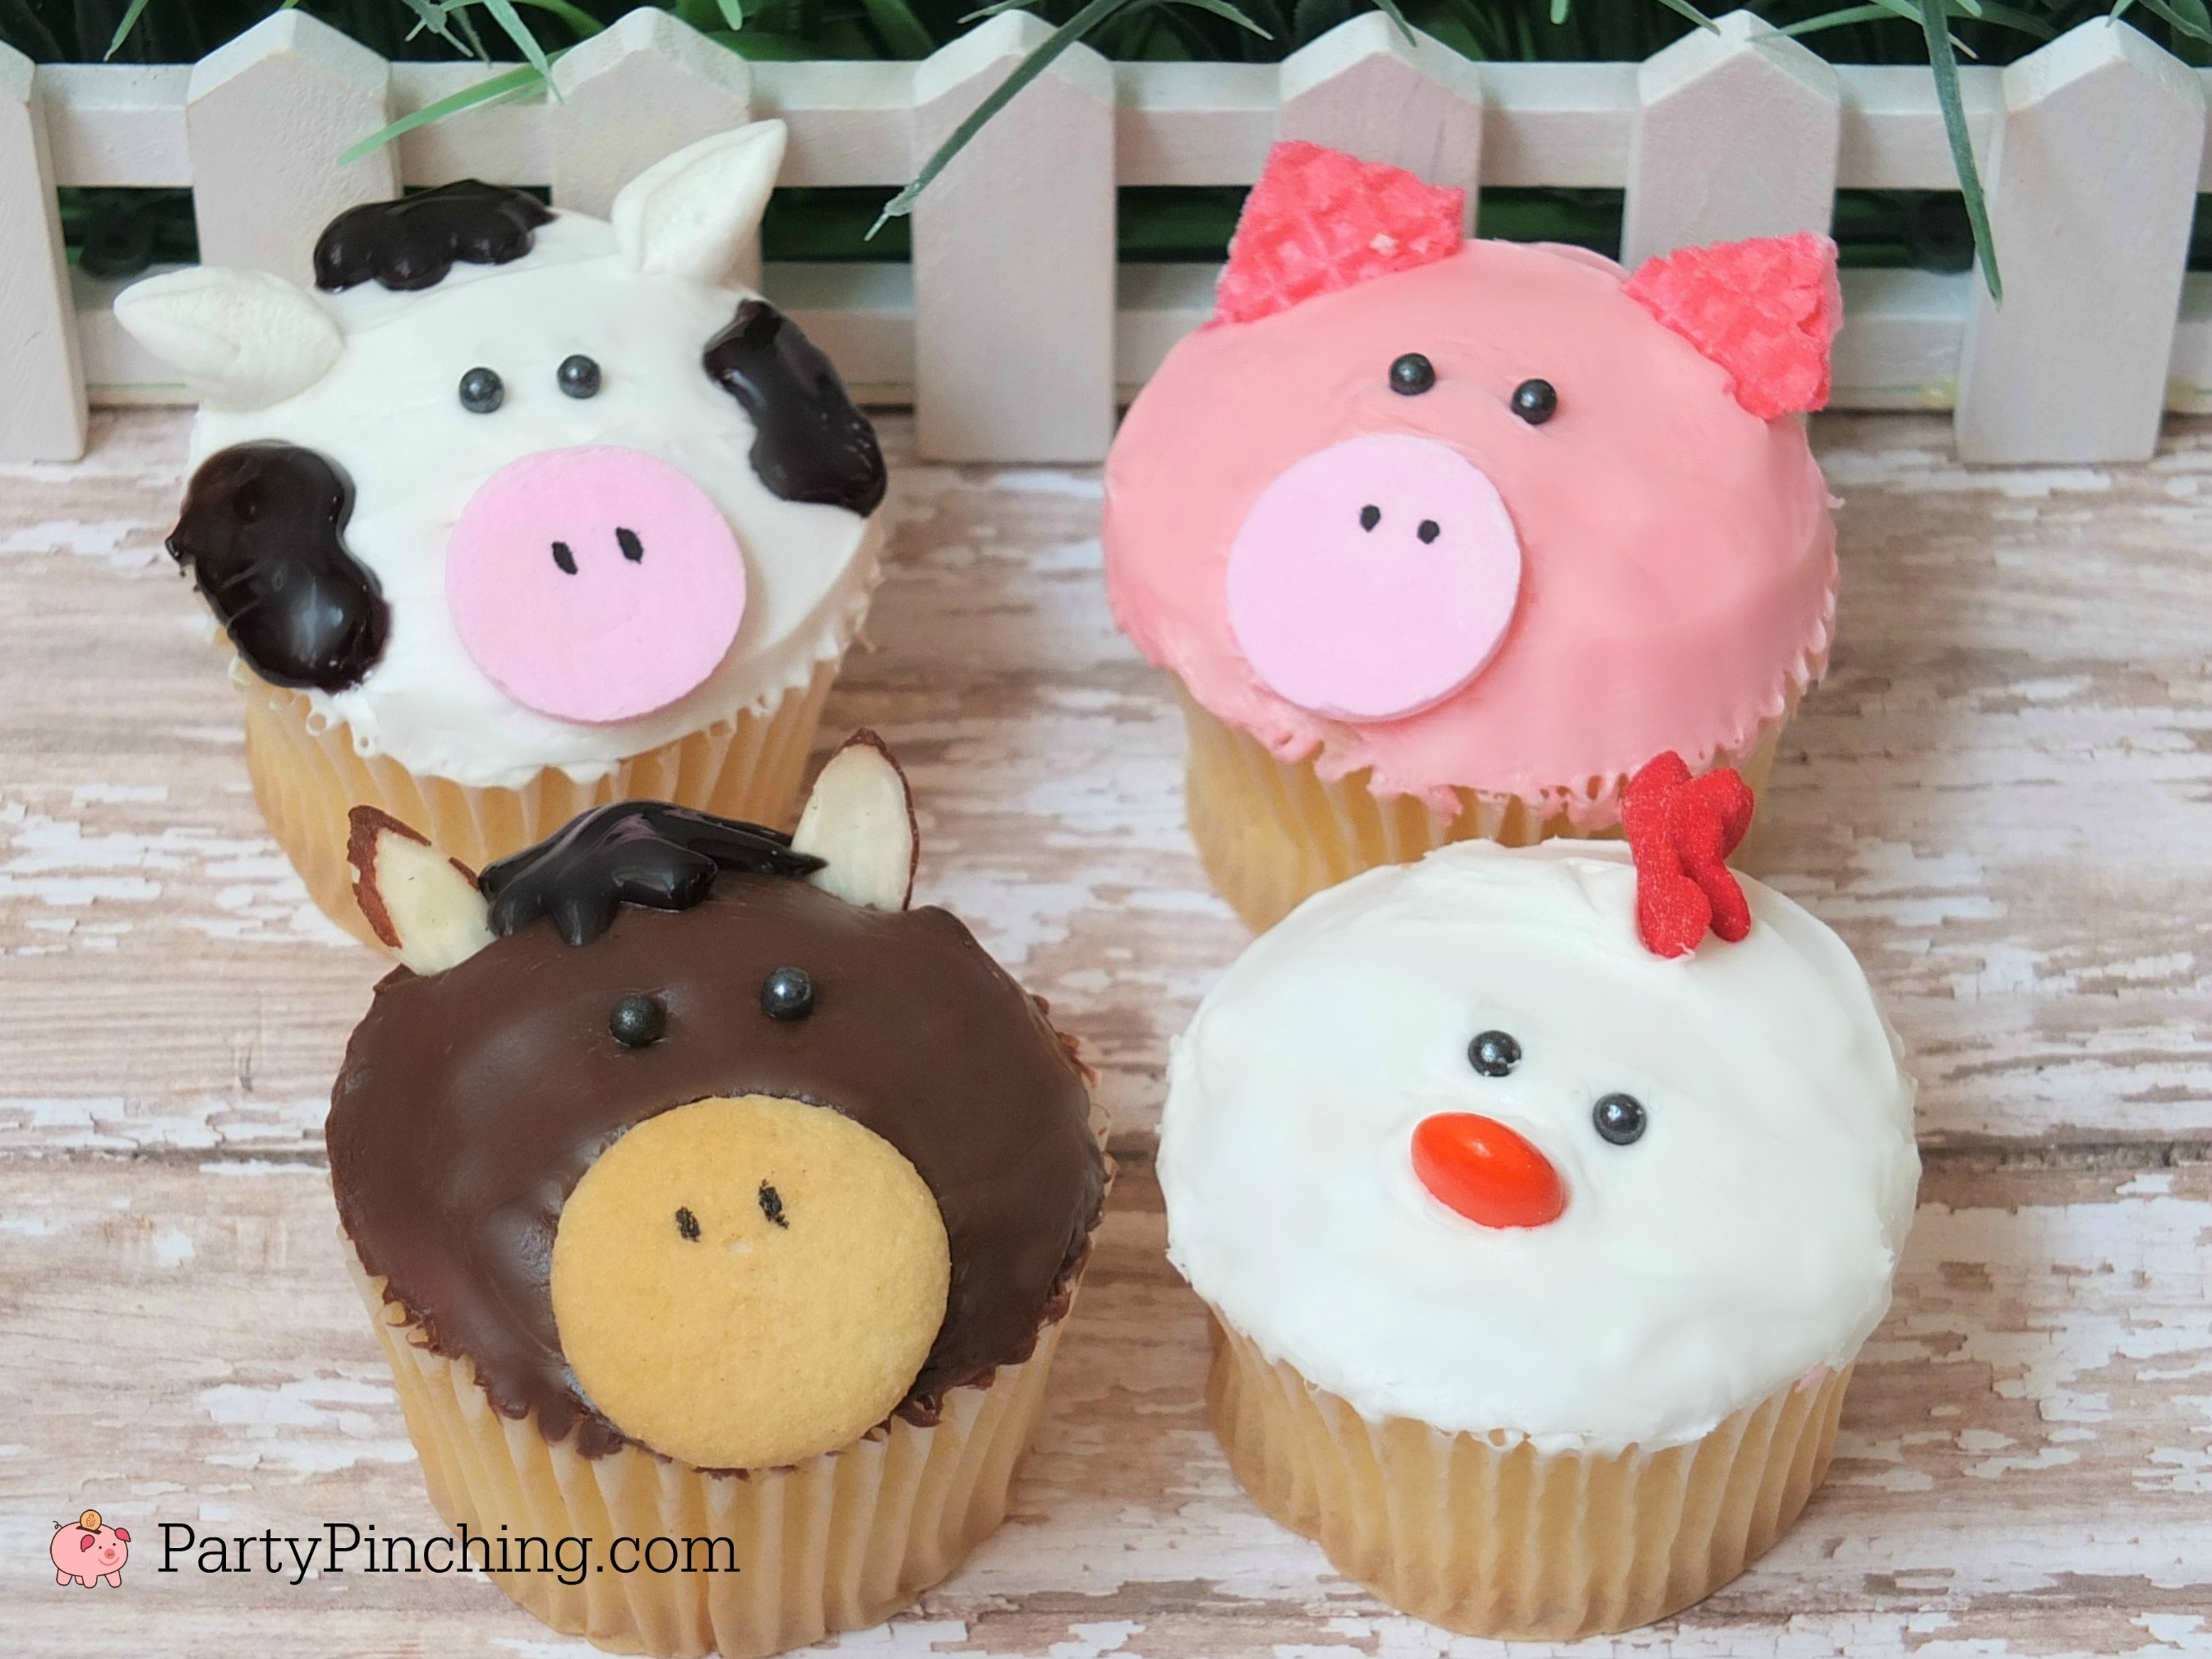 farm barnyard animal cupcakes, cow cupcake, pig cupcake, chicken rooster cupcake, horse cupcake, cute food, fun food for kids, sweet treats, farm theme party ideas, animal cupcakes, easy and furn cupcakes kids can make, no bake cupcakes, grocery store cupcakes